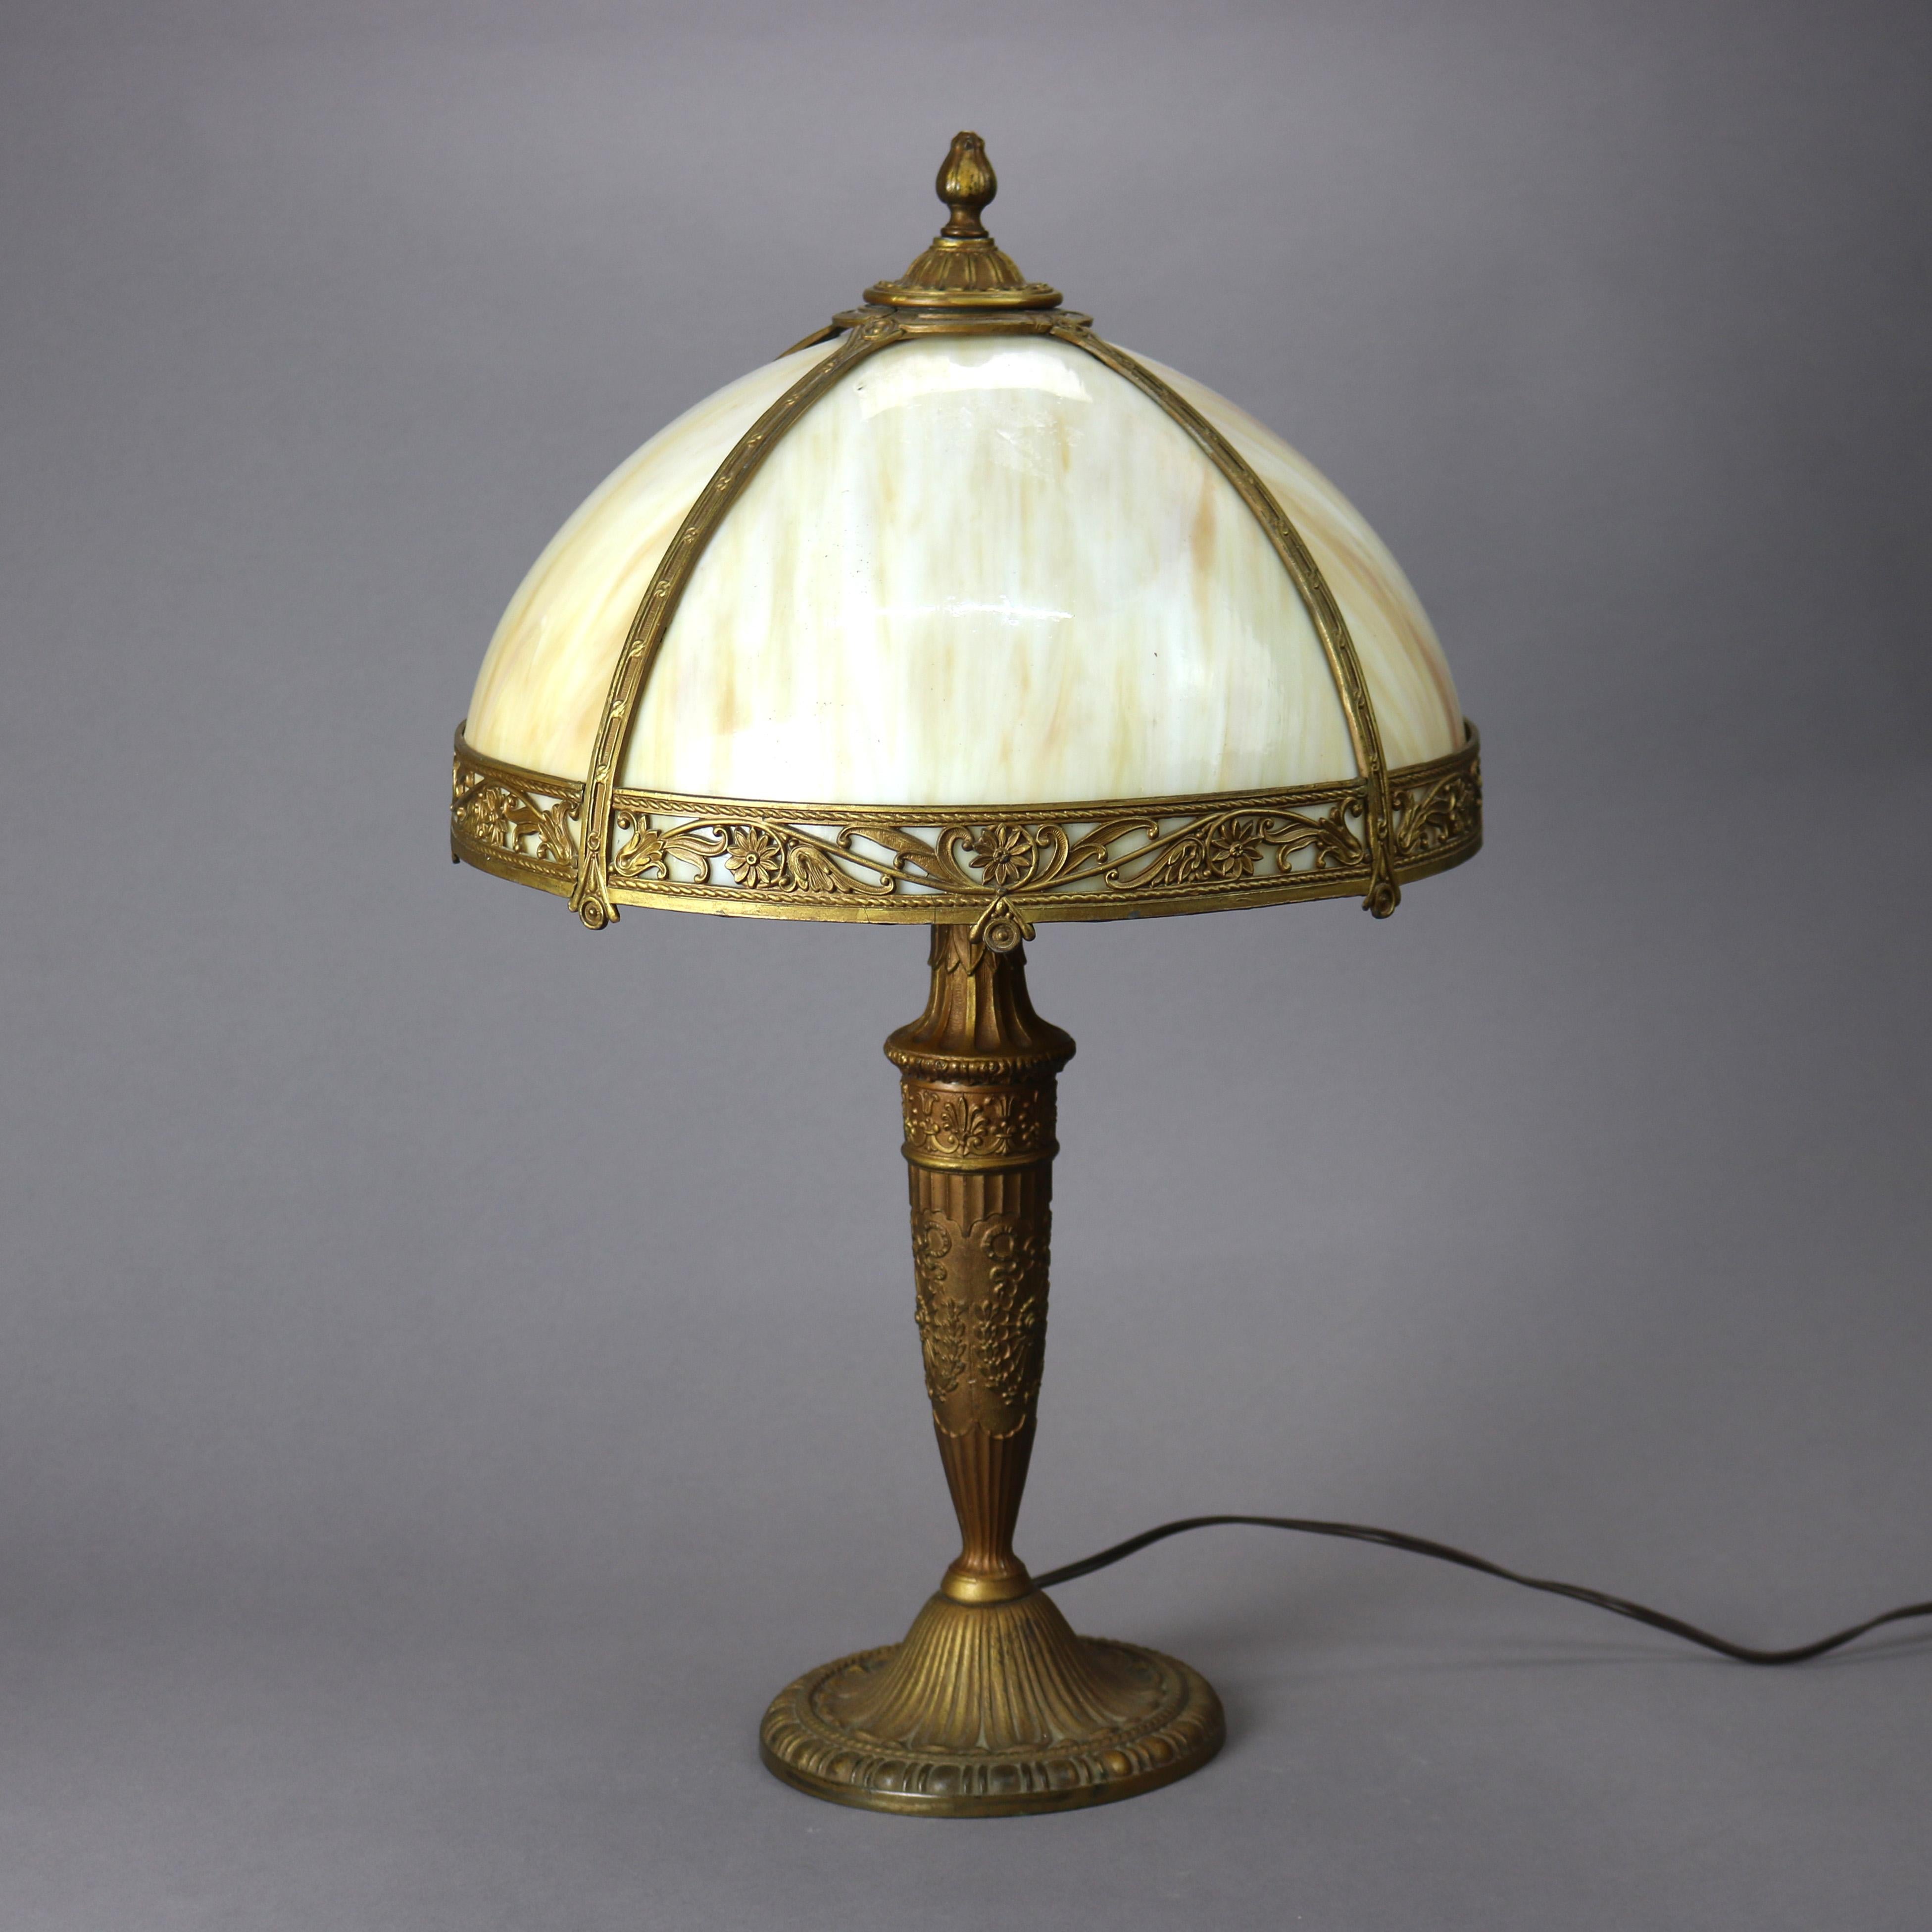 An antique Arts and Crafts table lamp offers dome form shade with cast shade having pierced floral band and housing bent slag glass panels over single socket cast base, circa 1920

Measures - 22.75